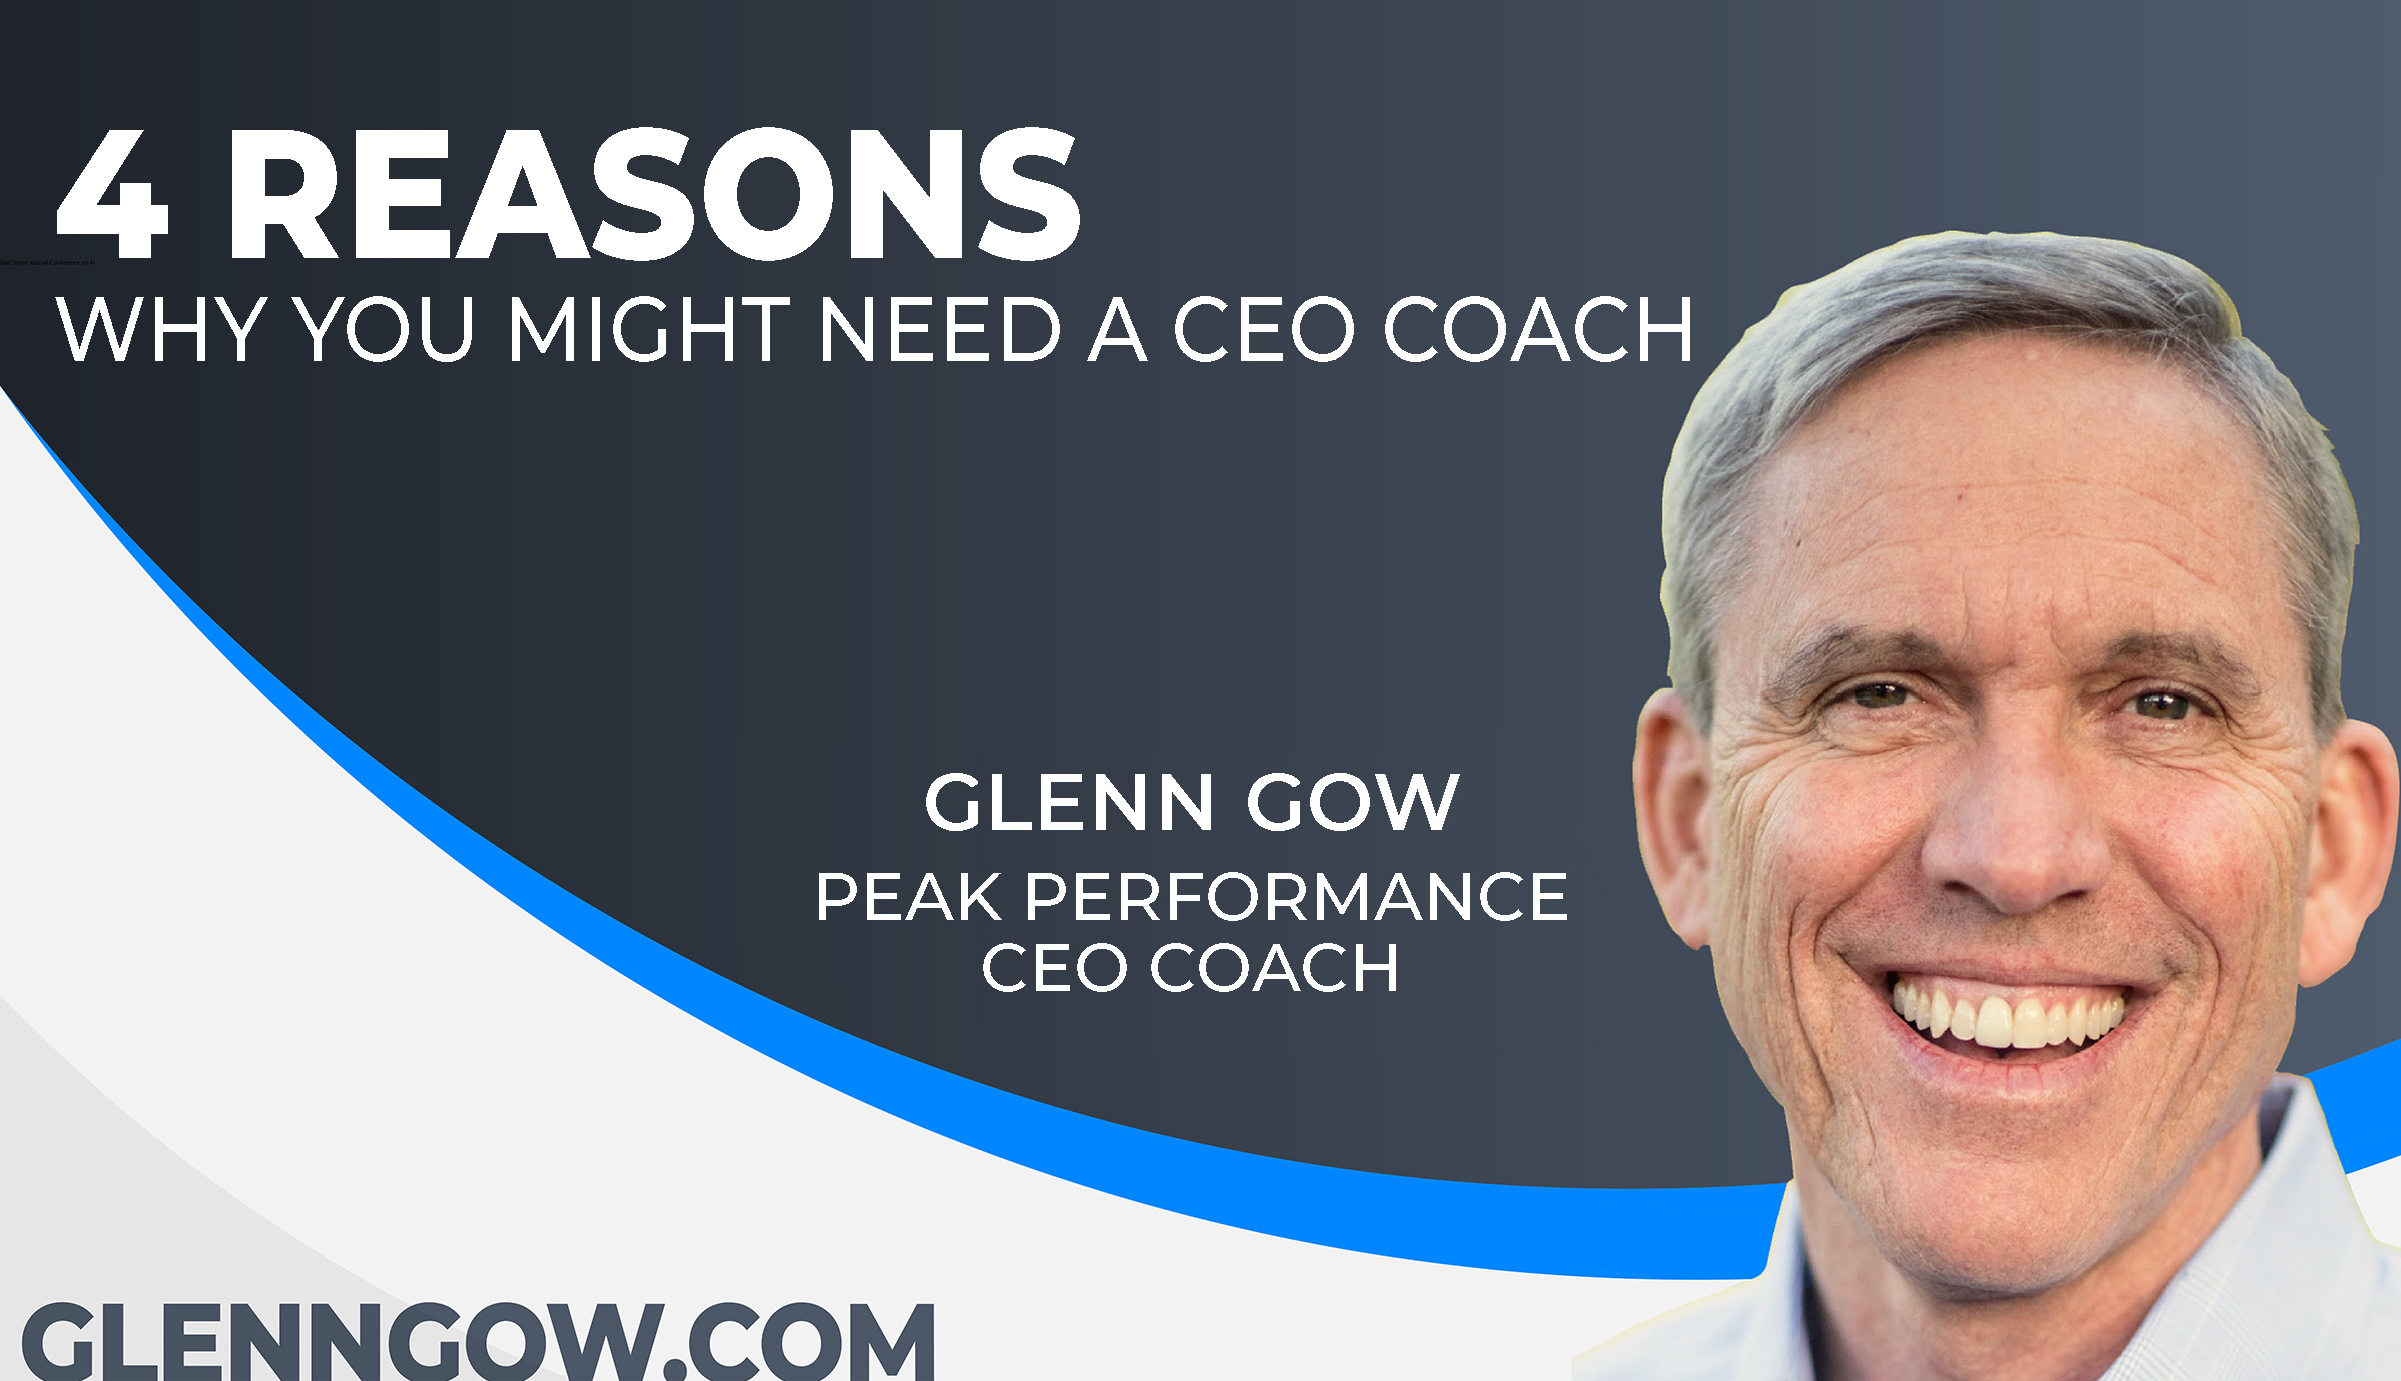 4 Reasons Why You Might Need a CEO Coach